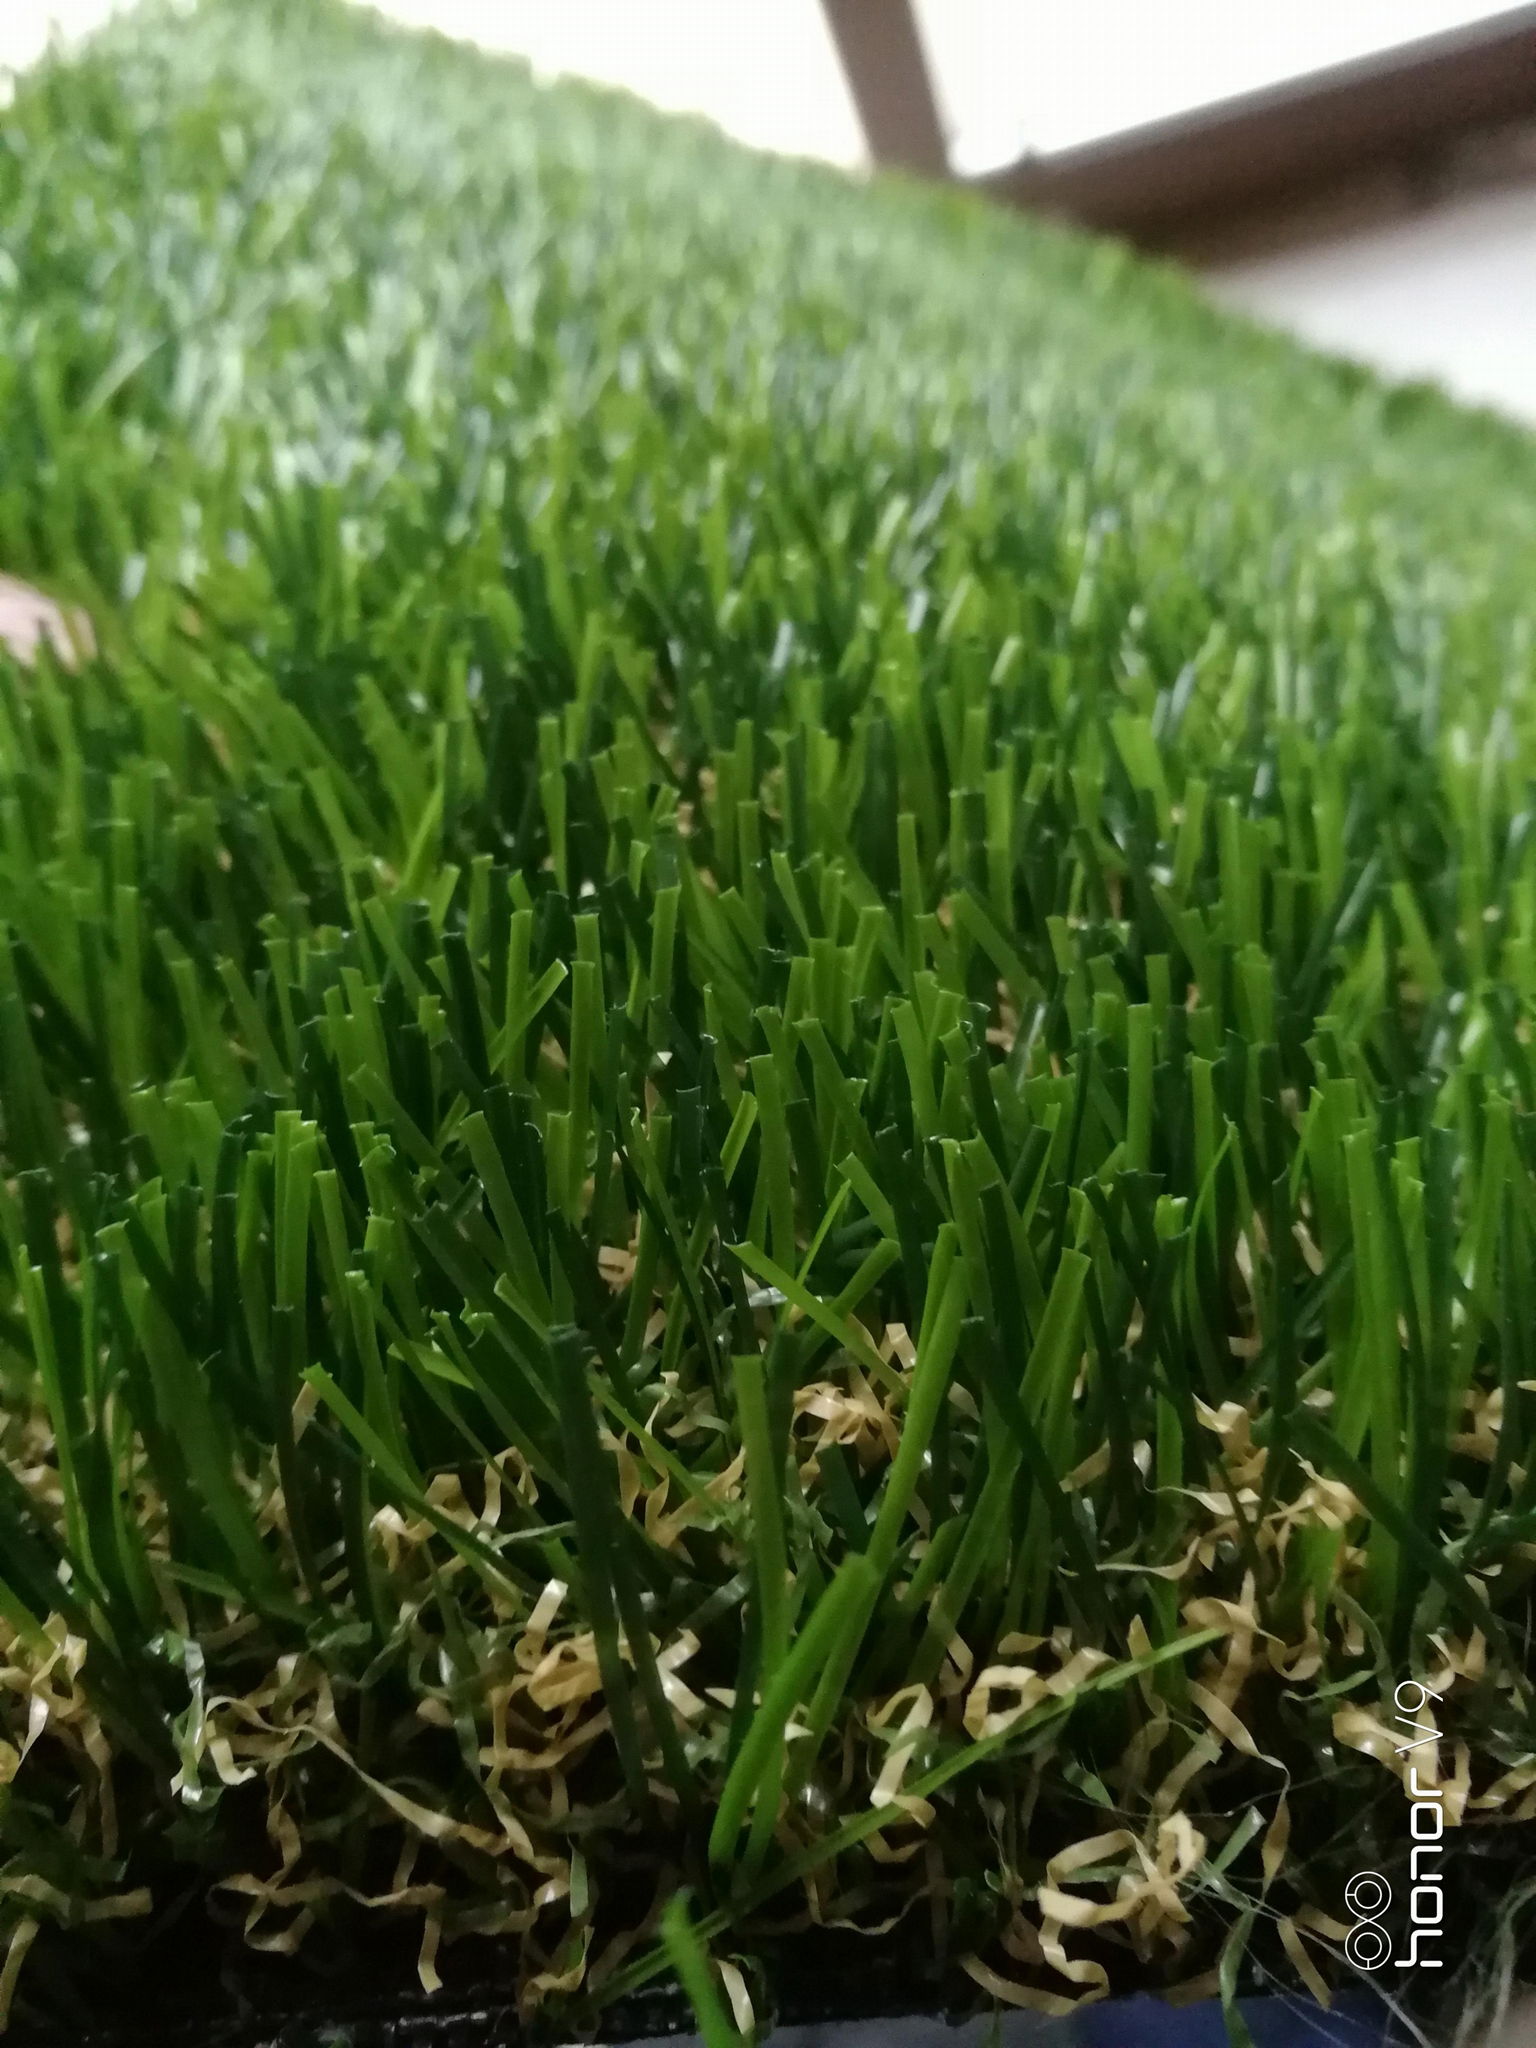 35mm natural looking and soft touching artifical grass for kids and pets 2